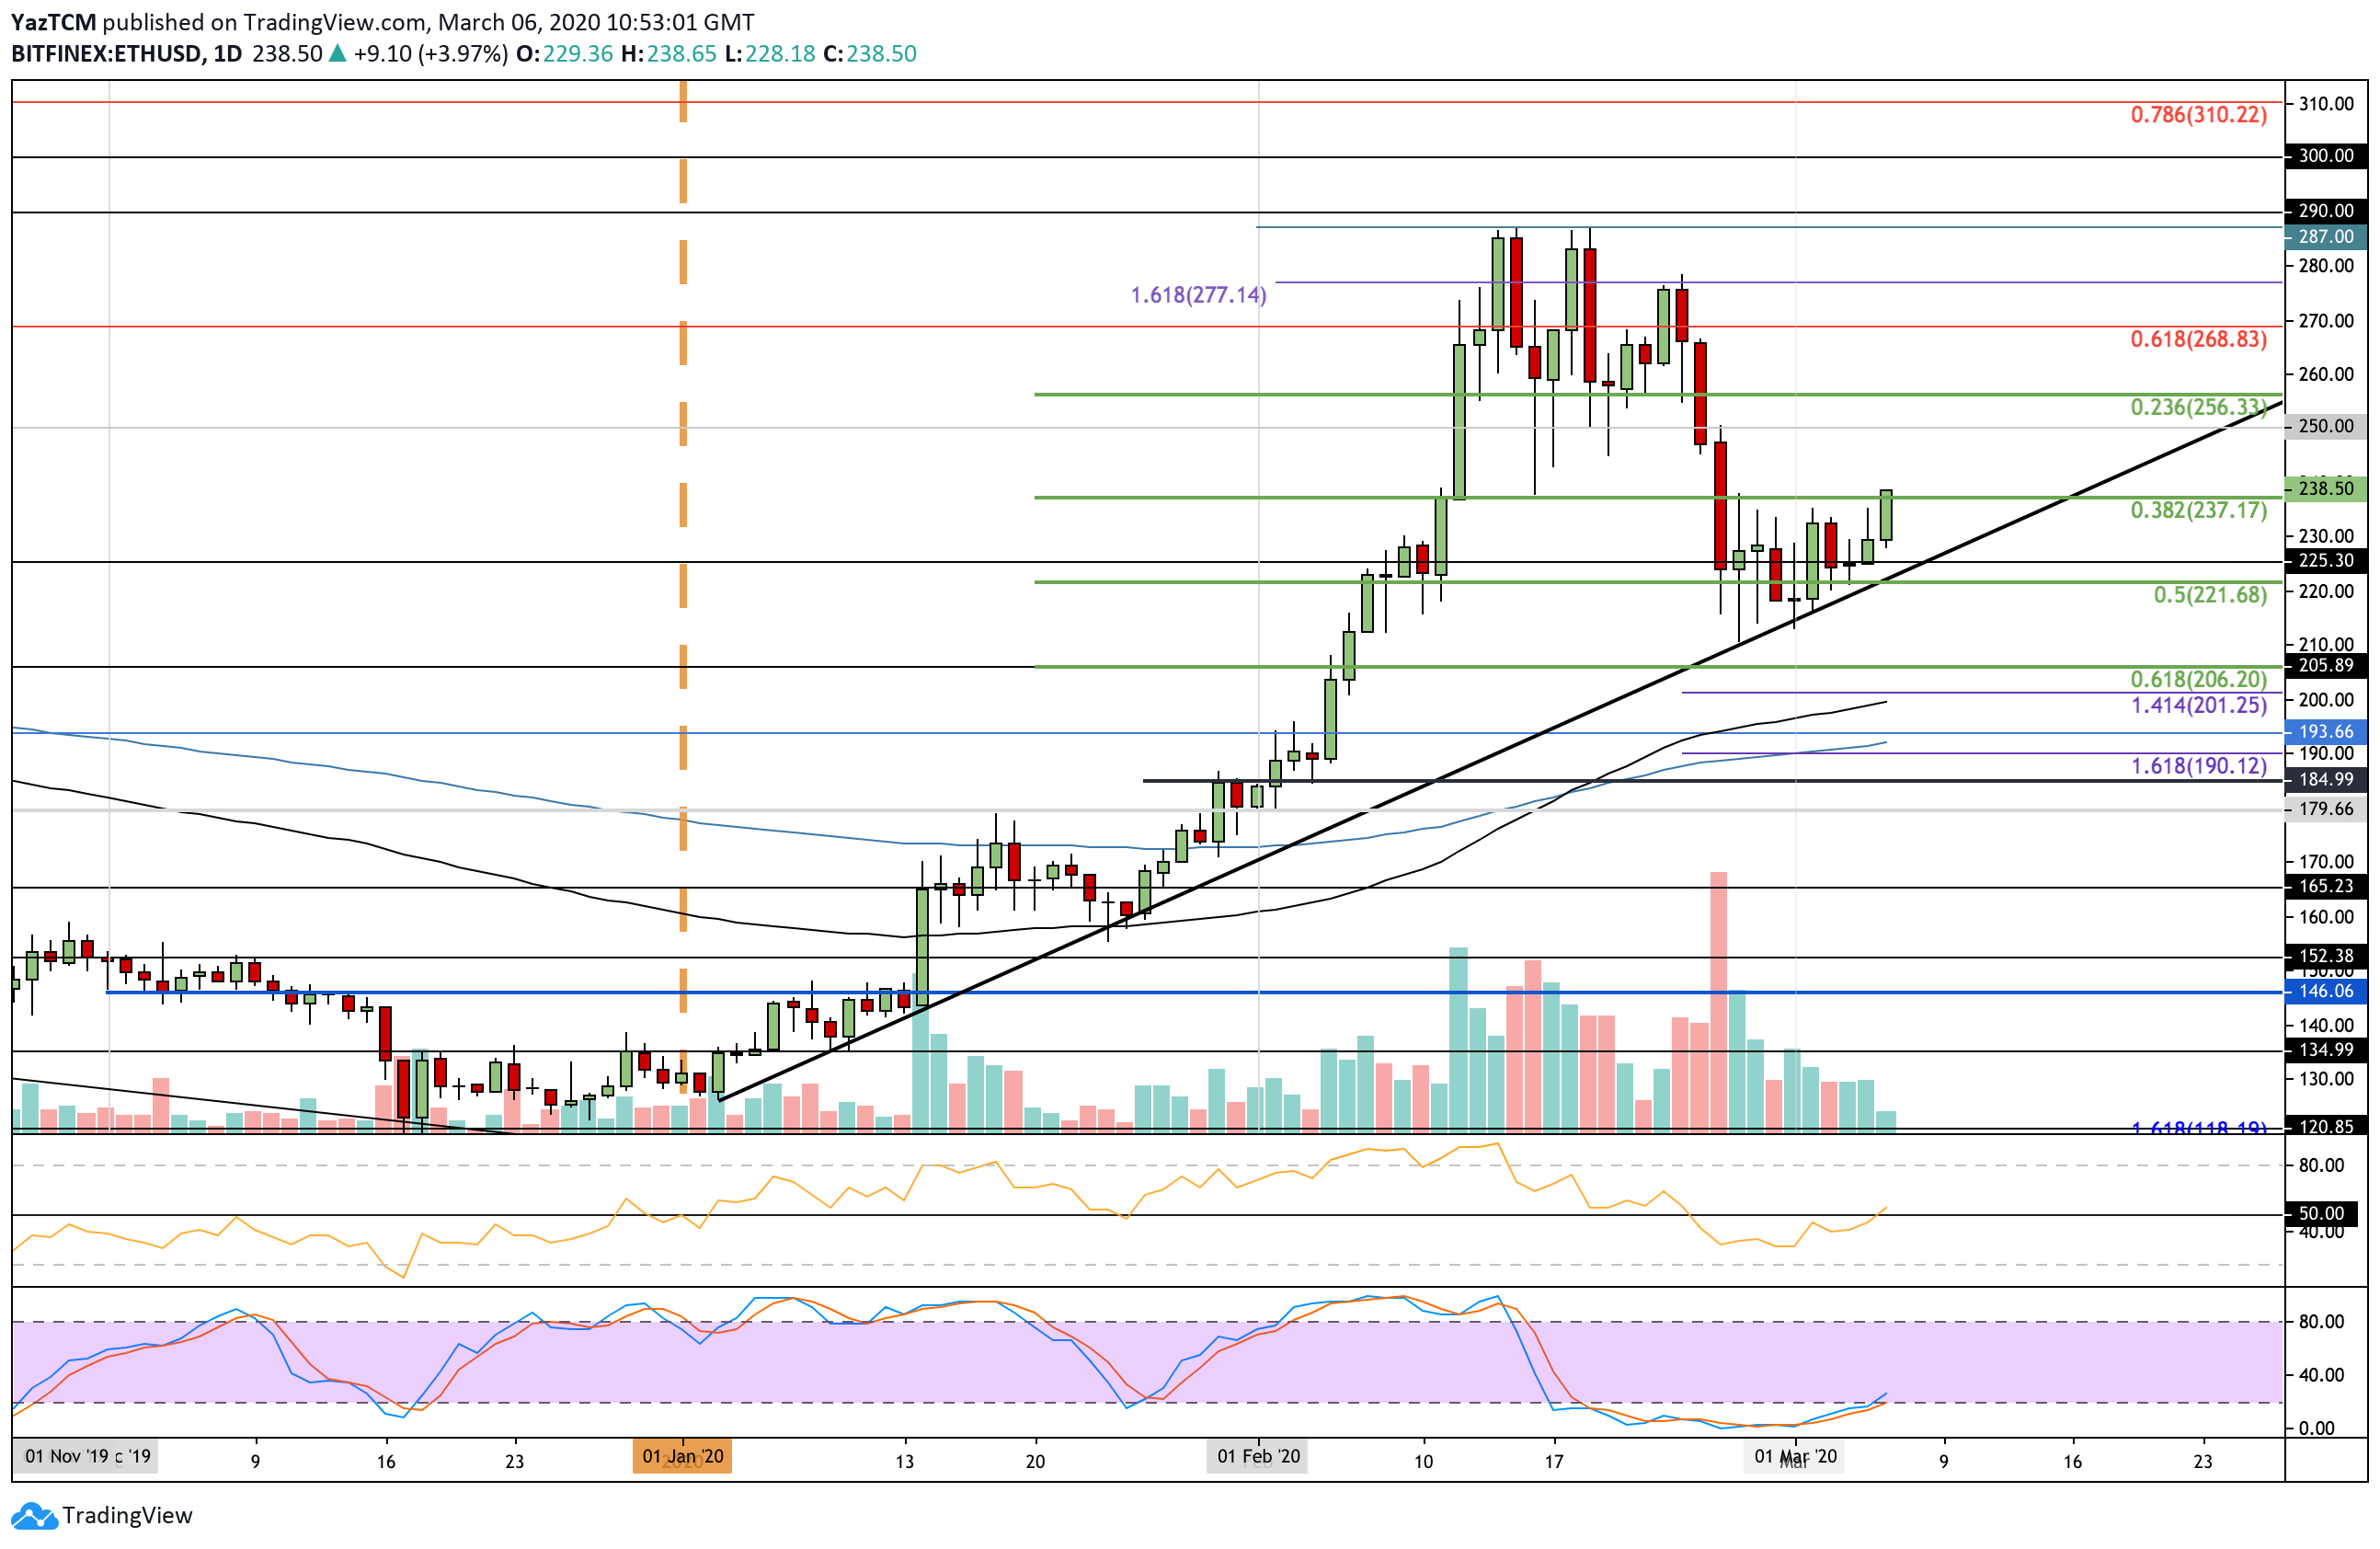 Crypto Price Analysis & Overview March 6: Bitcoin, Ethereum, Ripple, Tezos, and Chainlink.